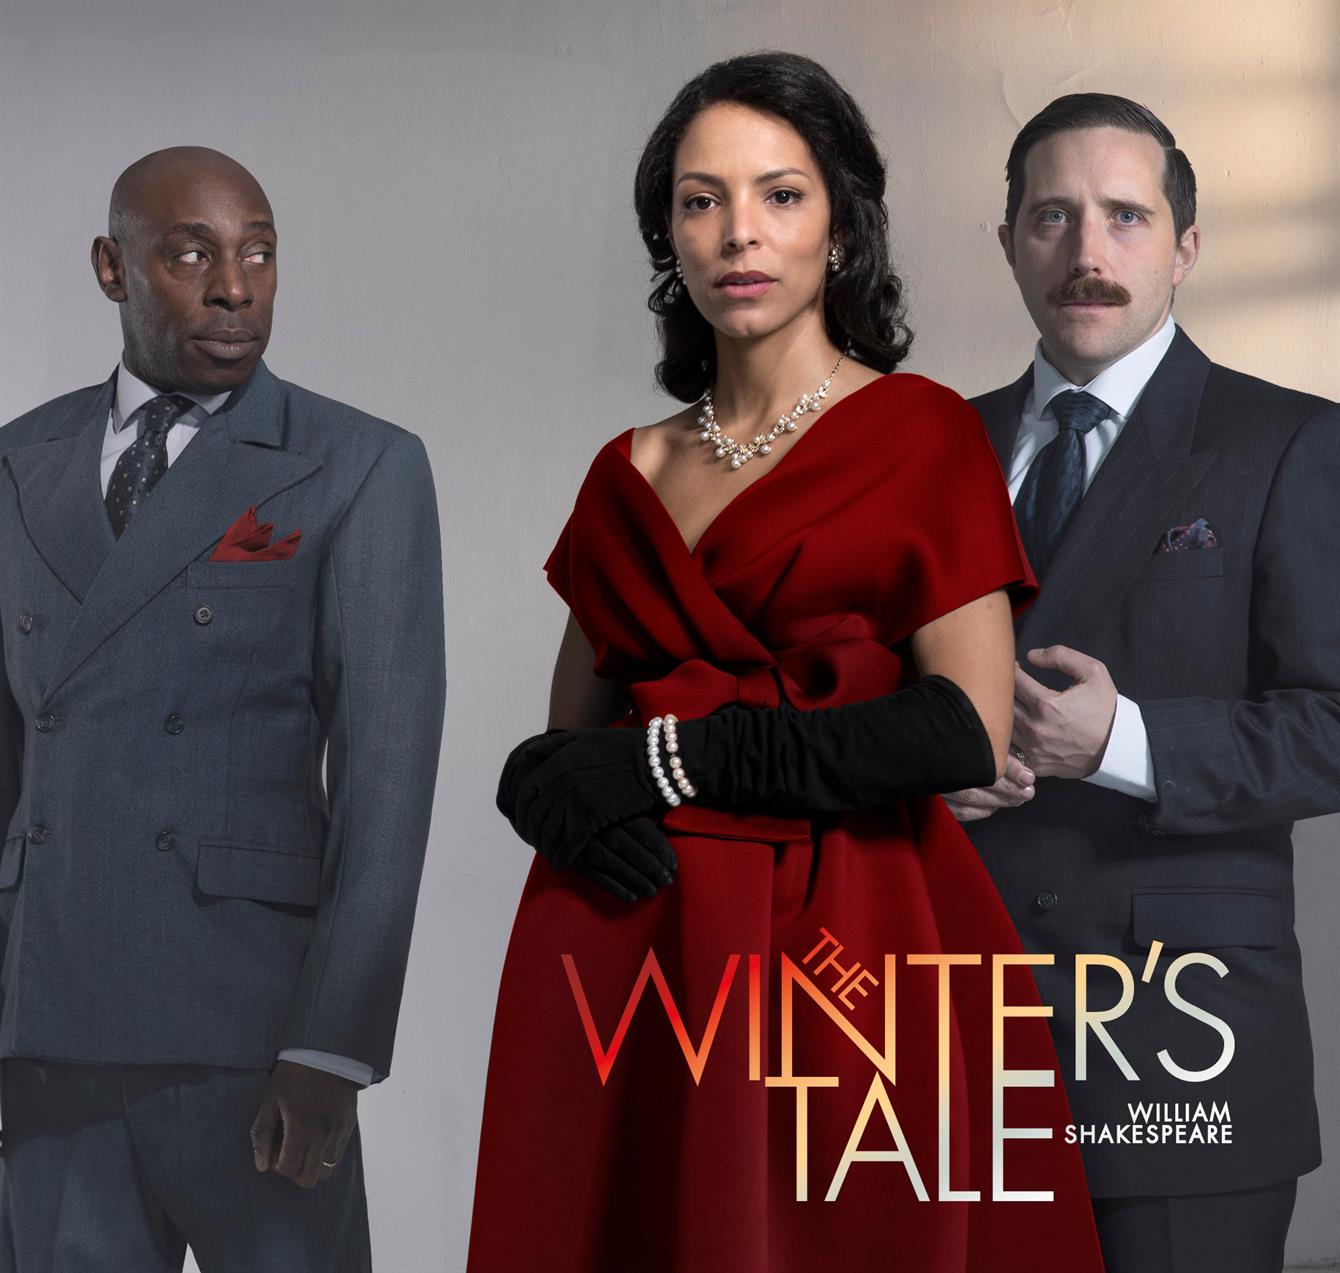 Two men and a woman stand behind the title 'The Winter's Tale'